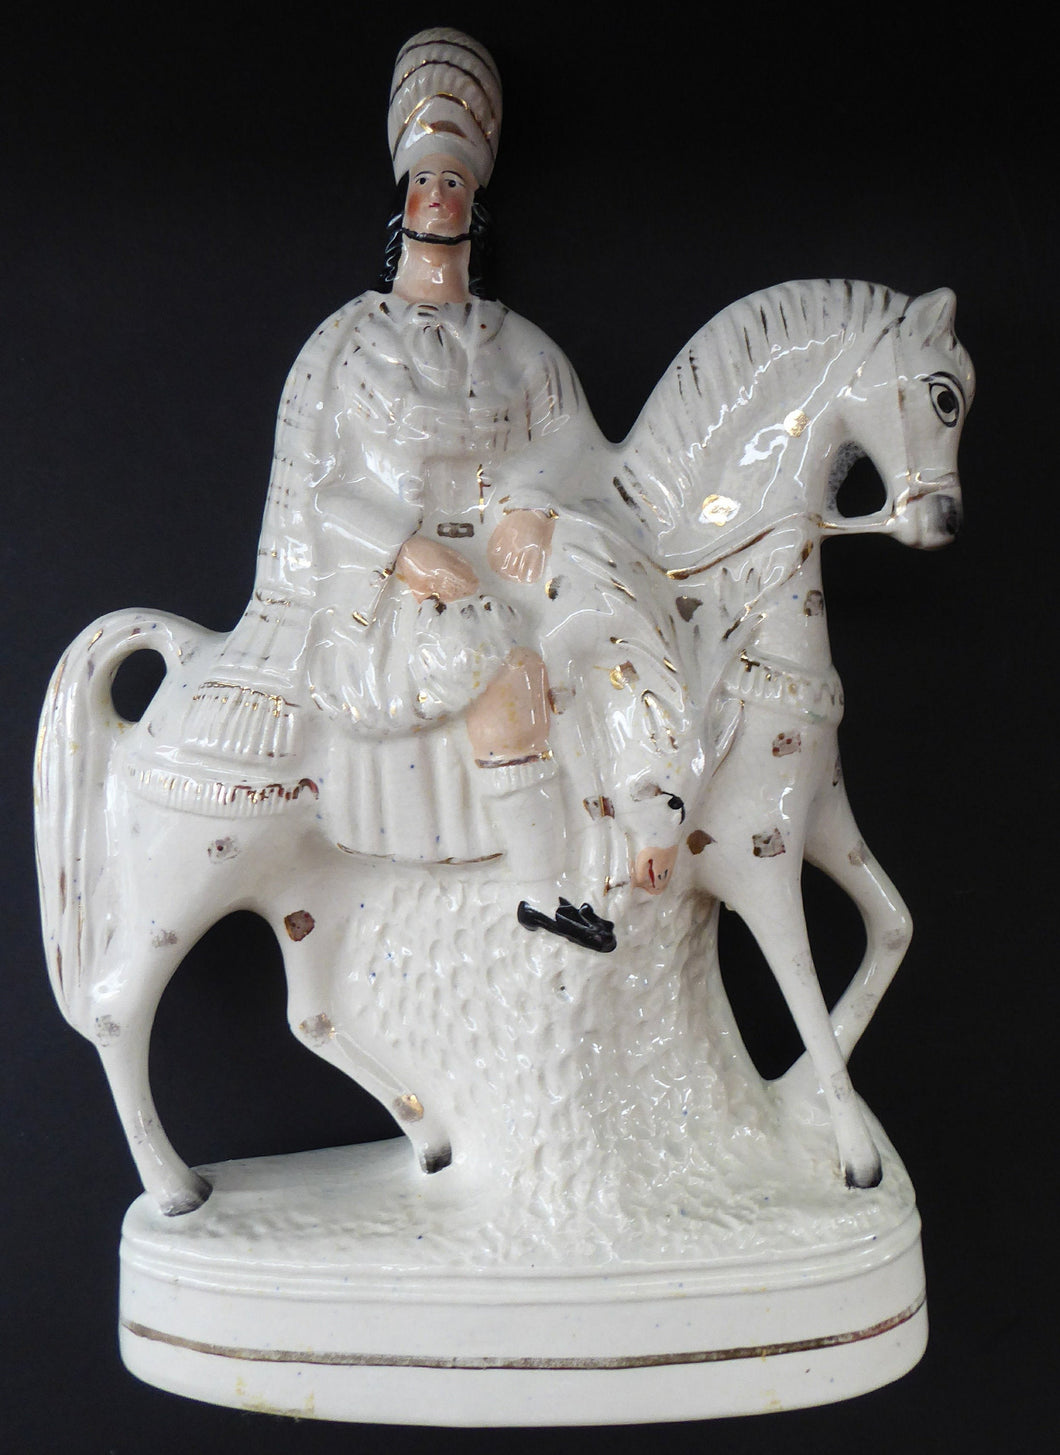 HUGE Antique Victorian STAFFORDSHIRE Figurine. Kilted Scotsman on Horseback. 14 inches height. Great Display Piece